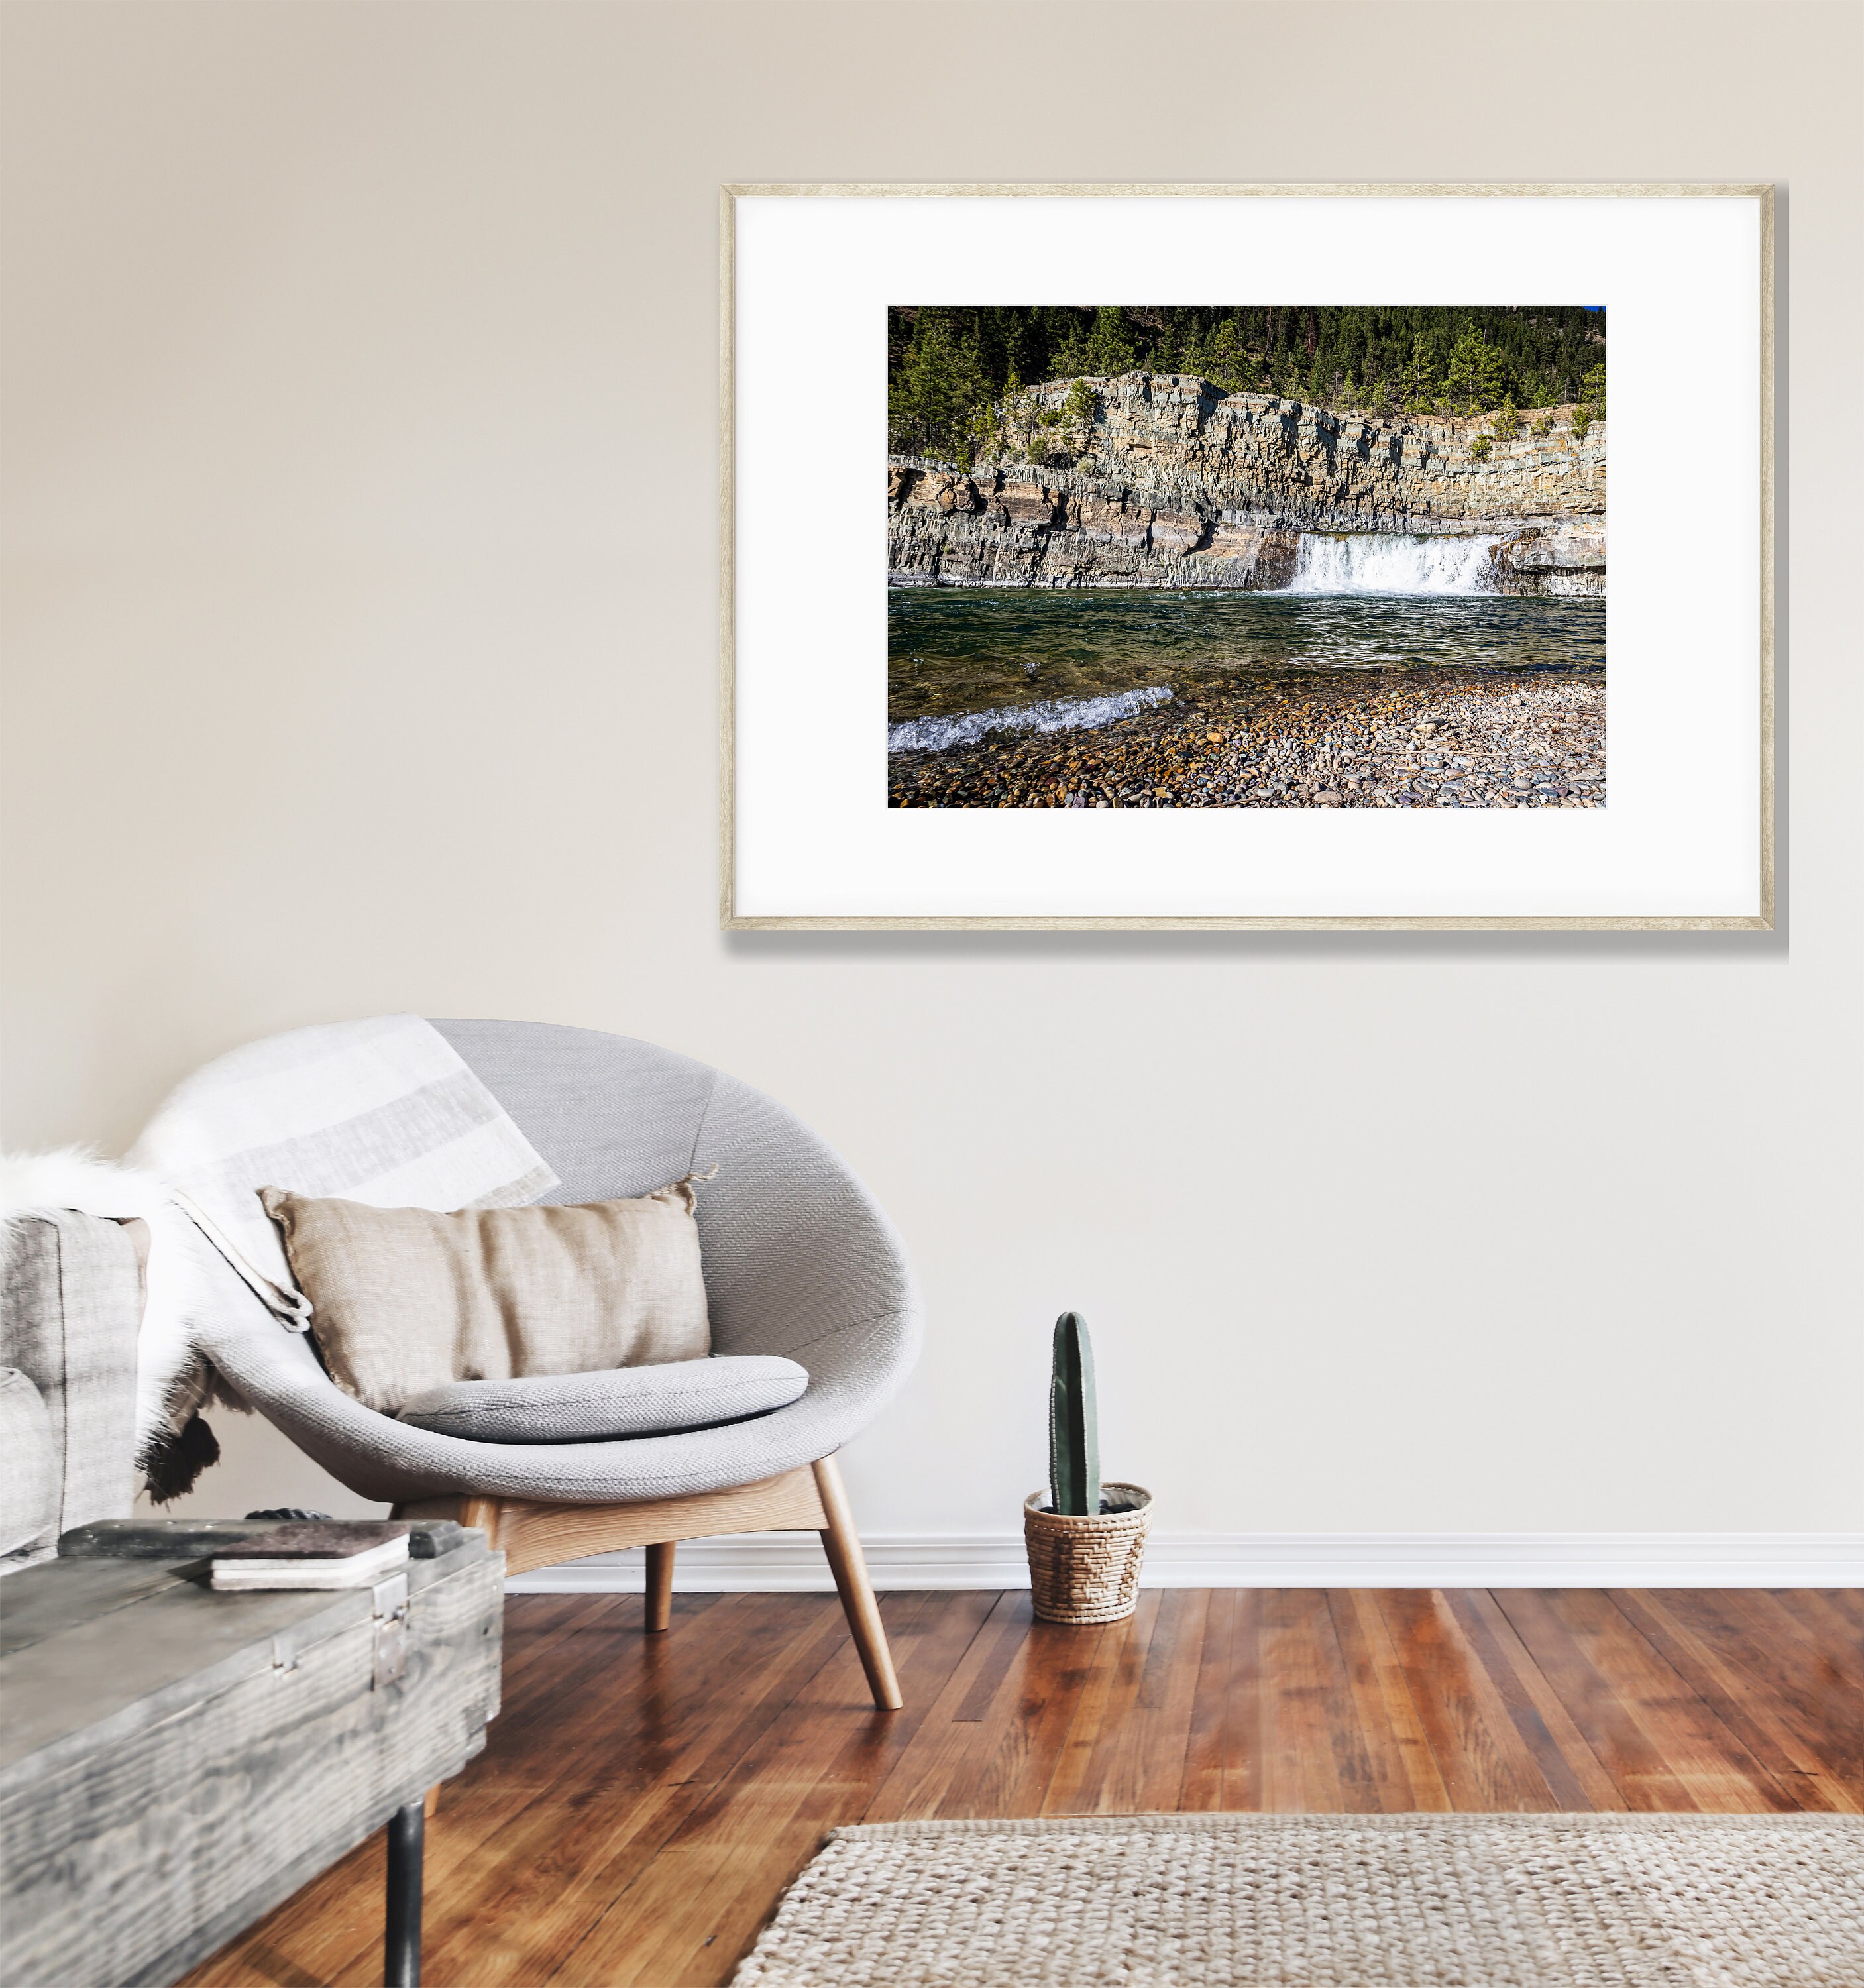 Roar of a Waterfall Landscape Photo Image Available in - Etsy